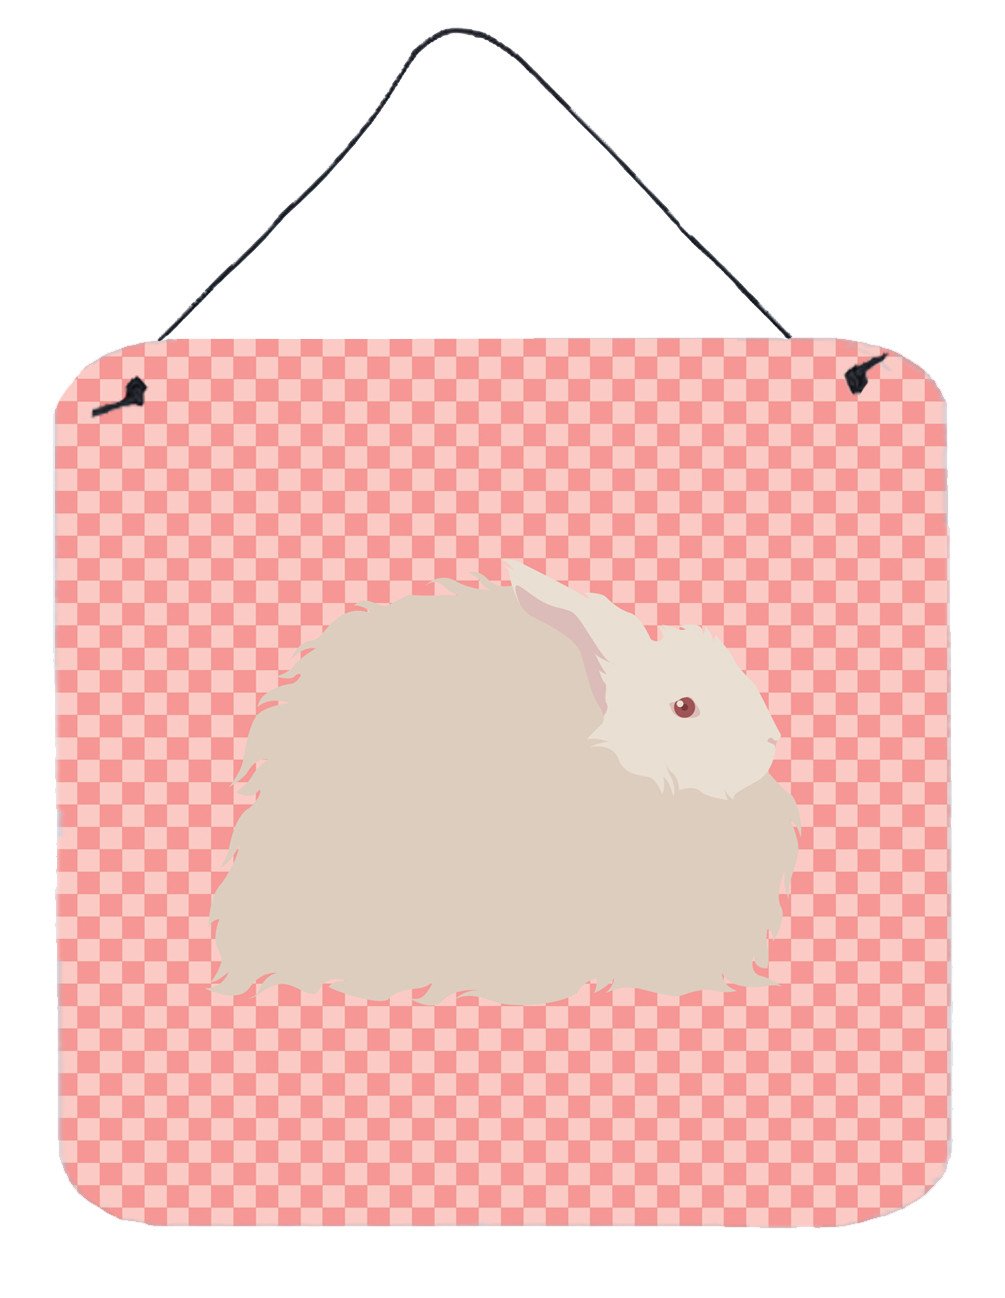 Fluffy Angora Rabbit Pink Check Wall or Door Hanging Prints BB7959DS66 by Caroline's Treasures